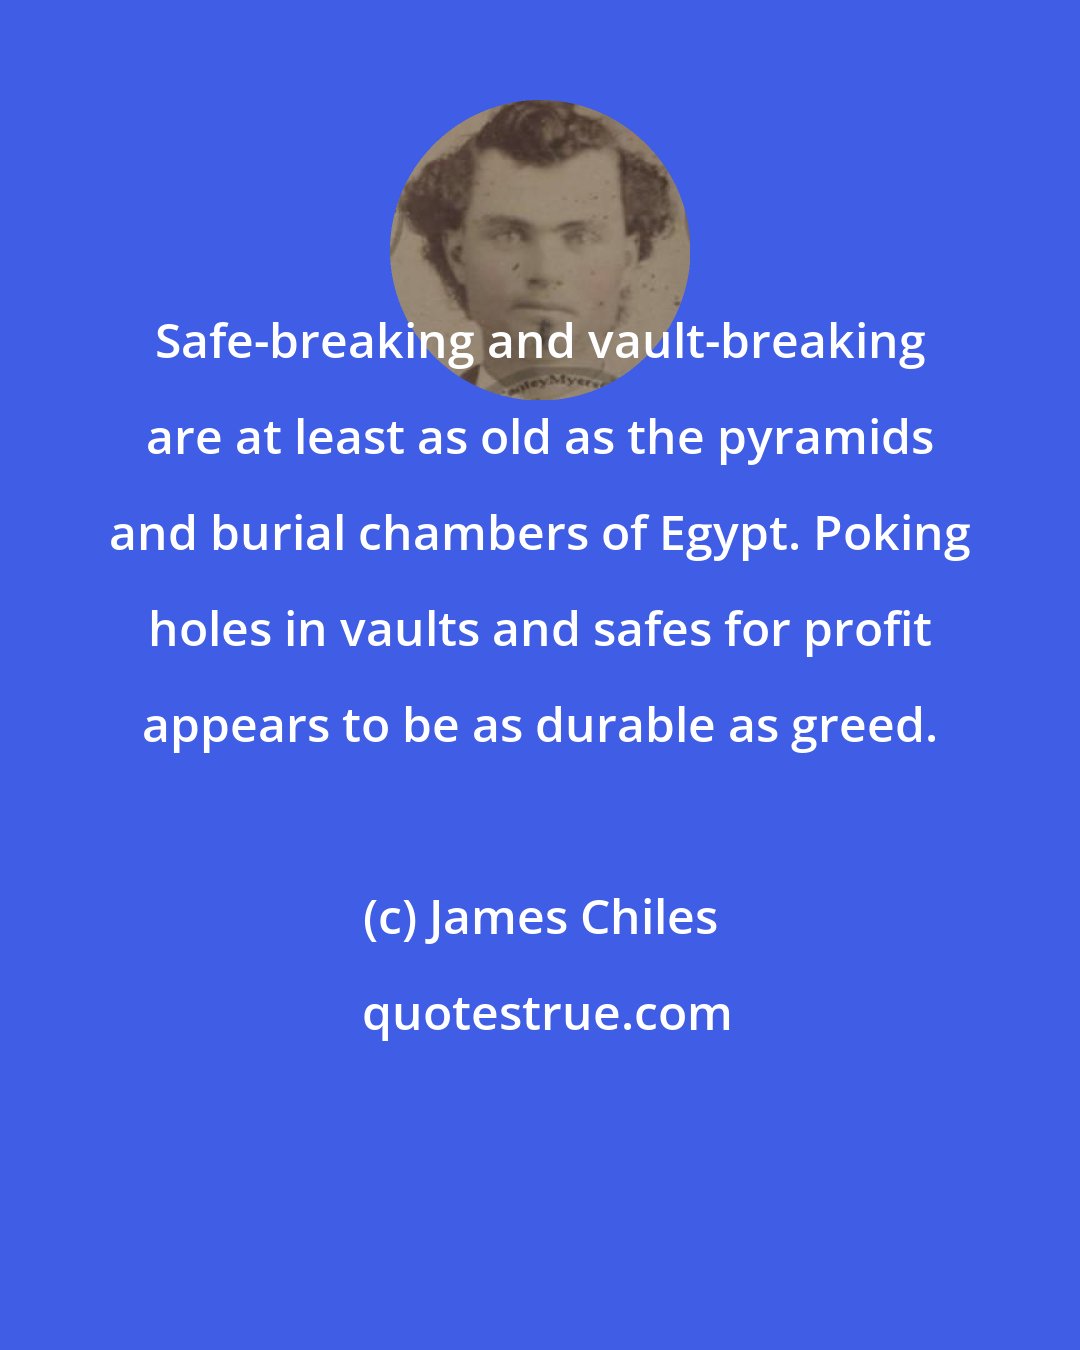 James Chiles: Safe-breaking and vault-breaking are at least as old as the pyramids and burial chambers of Egypt. Poking holes in vaults and safes for profit appears to be as durable as greed.